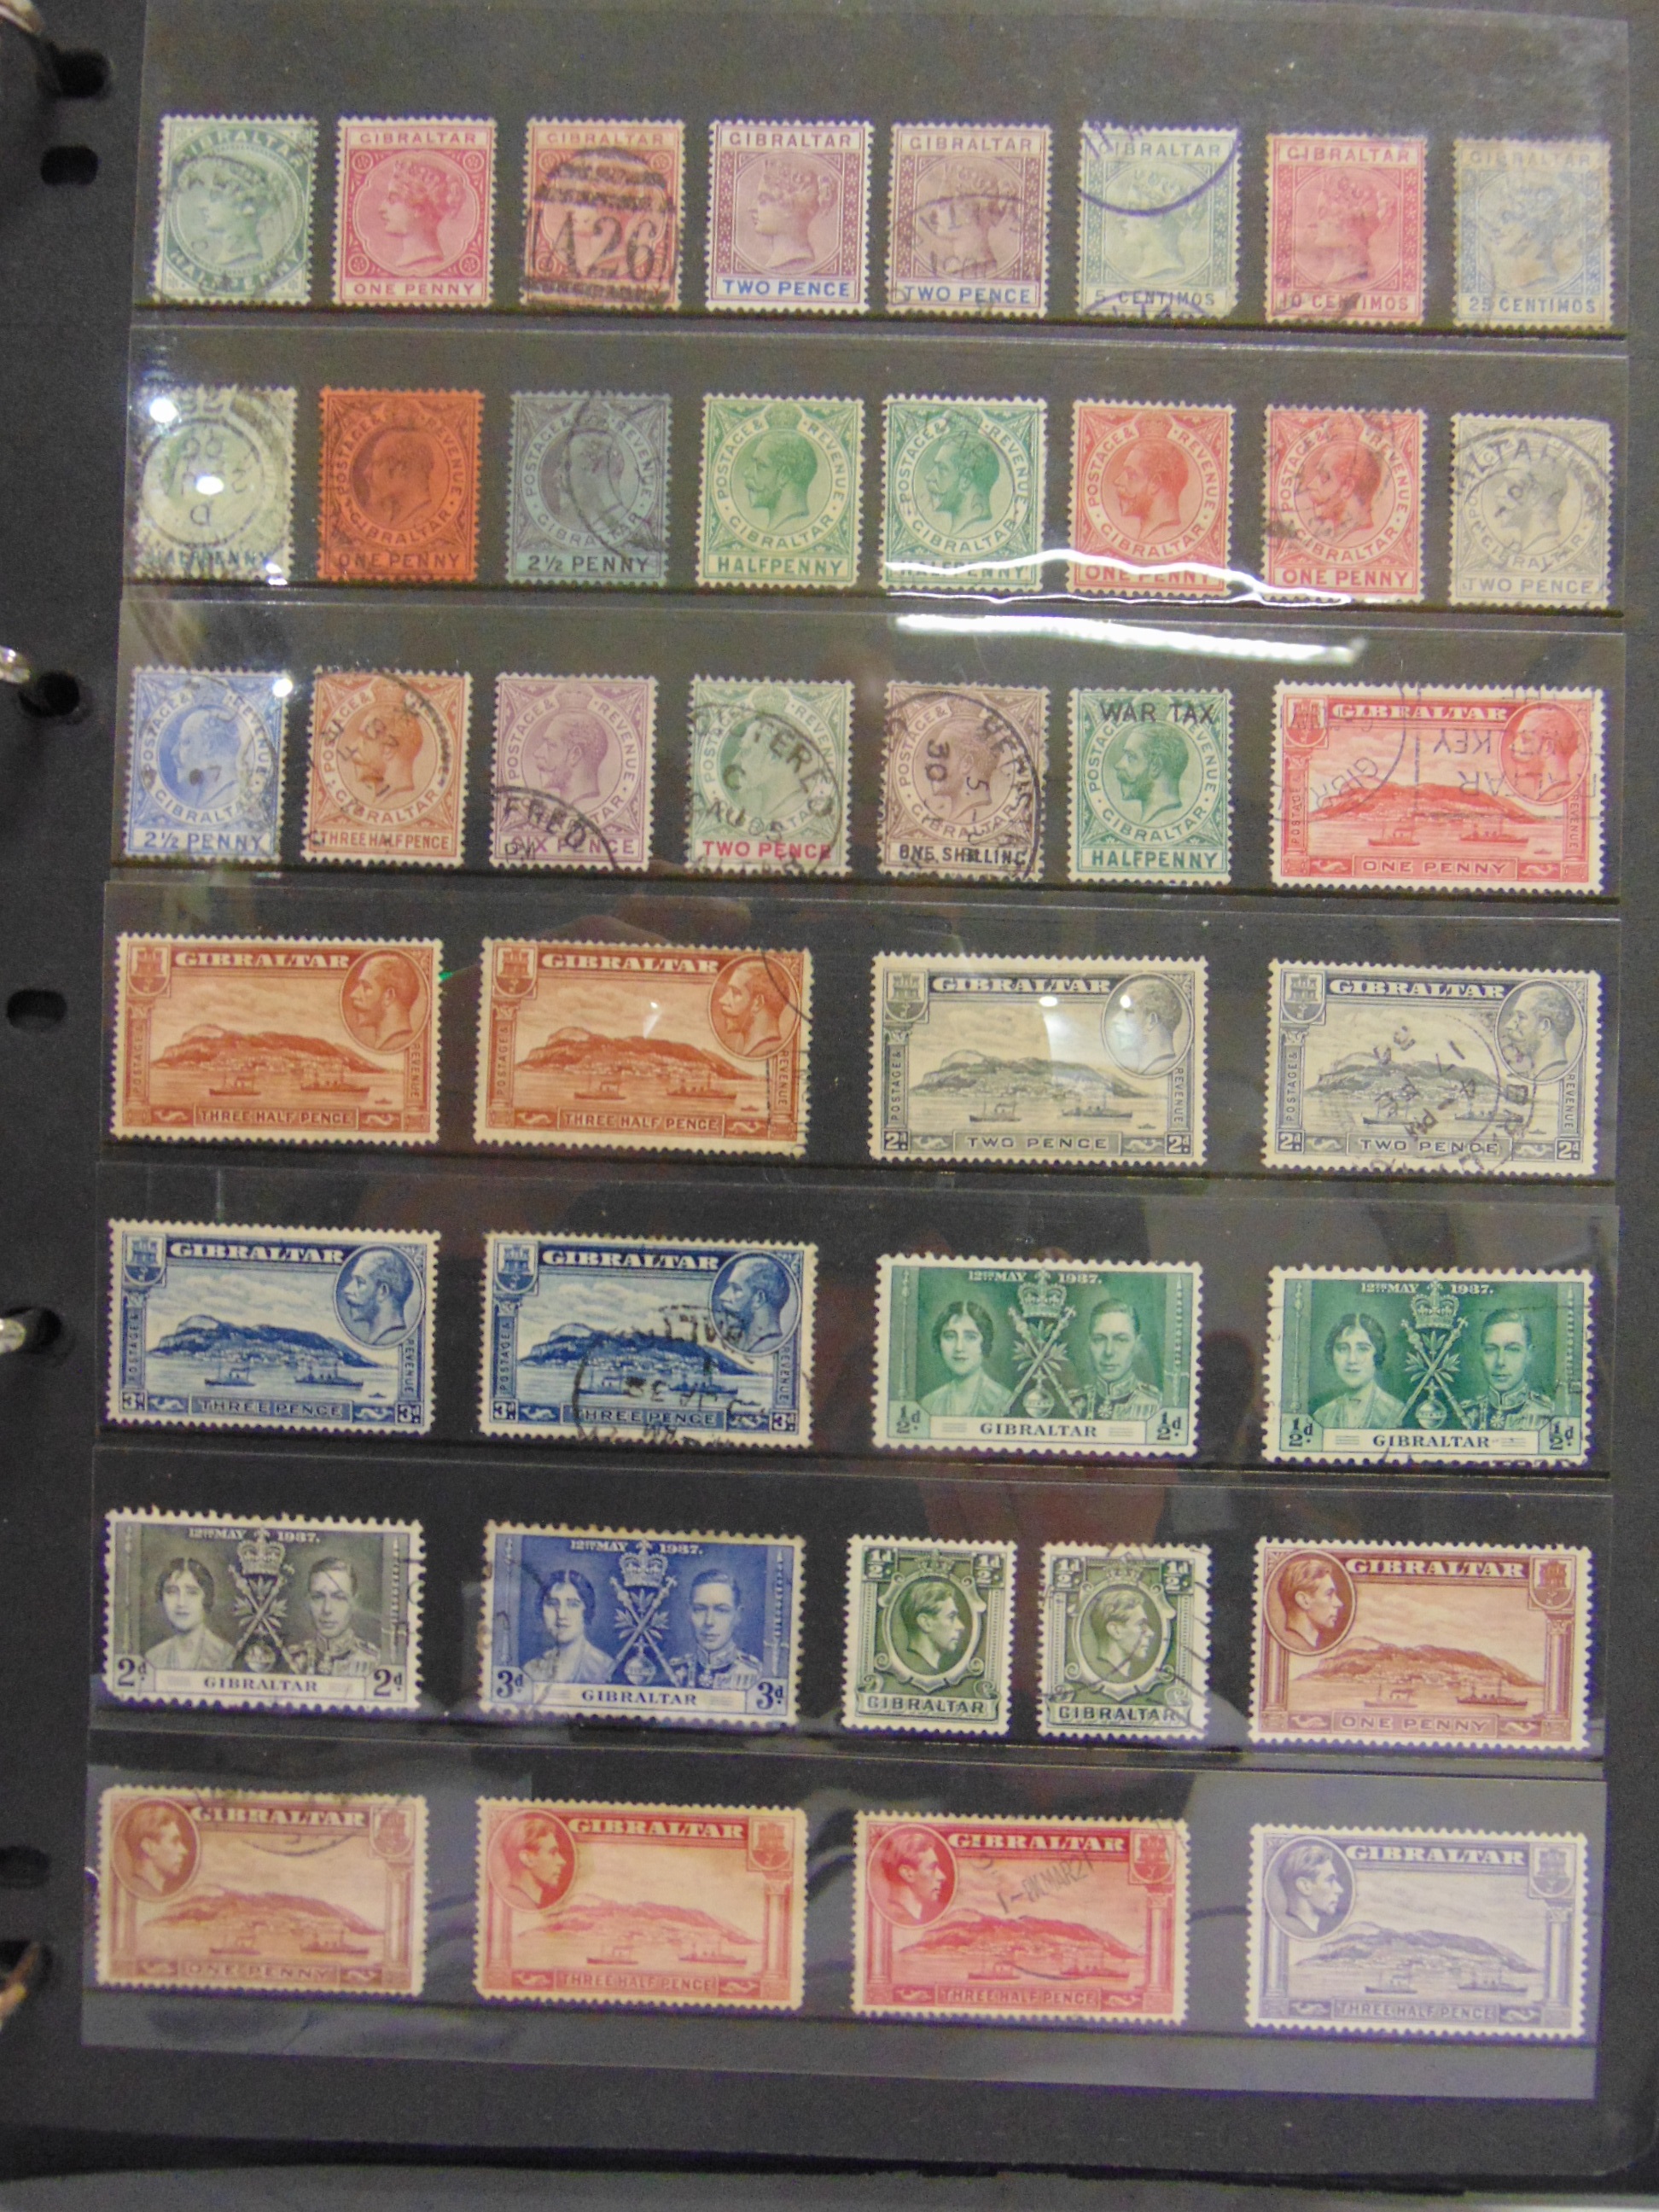 STAMPS - A PART-WORLD COLLECTION including the Falkland Islands, Fiji, The Gambia, Gold Coast / - Image 3 of 12